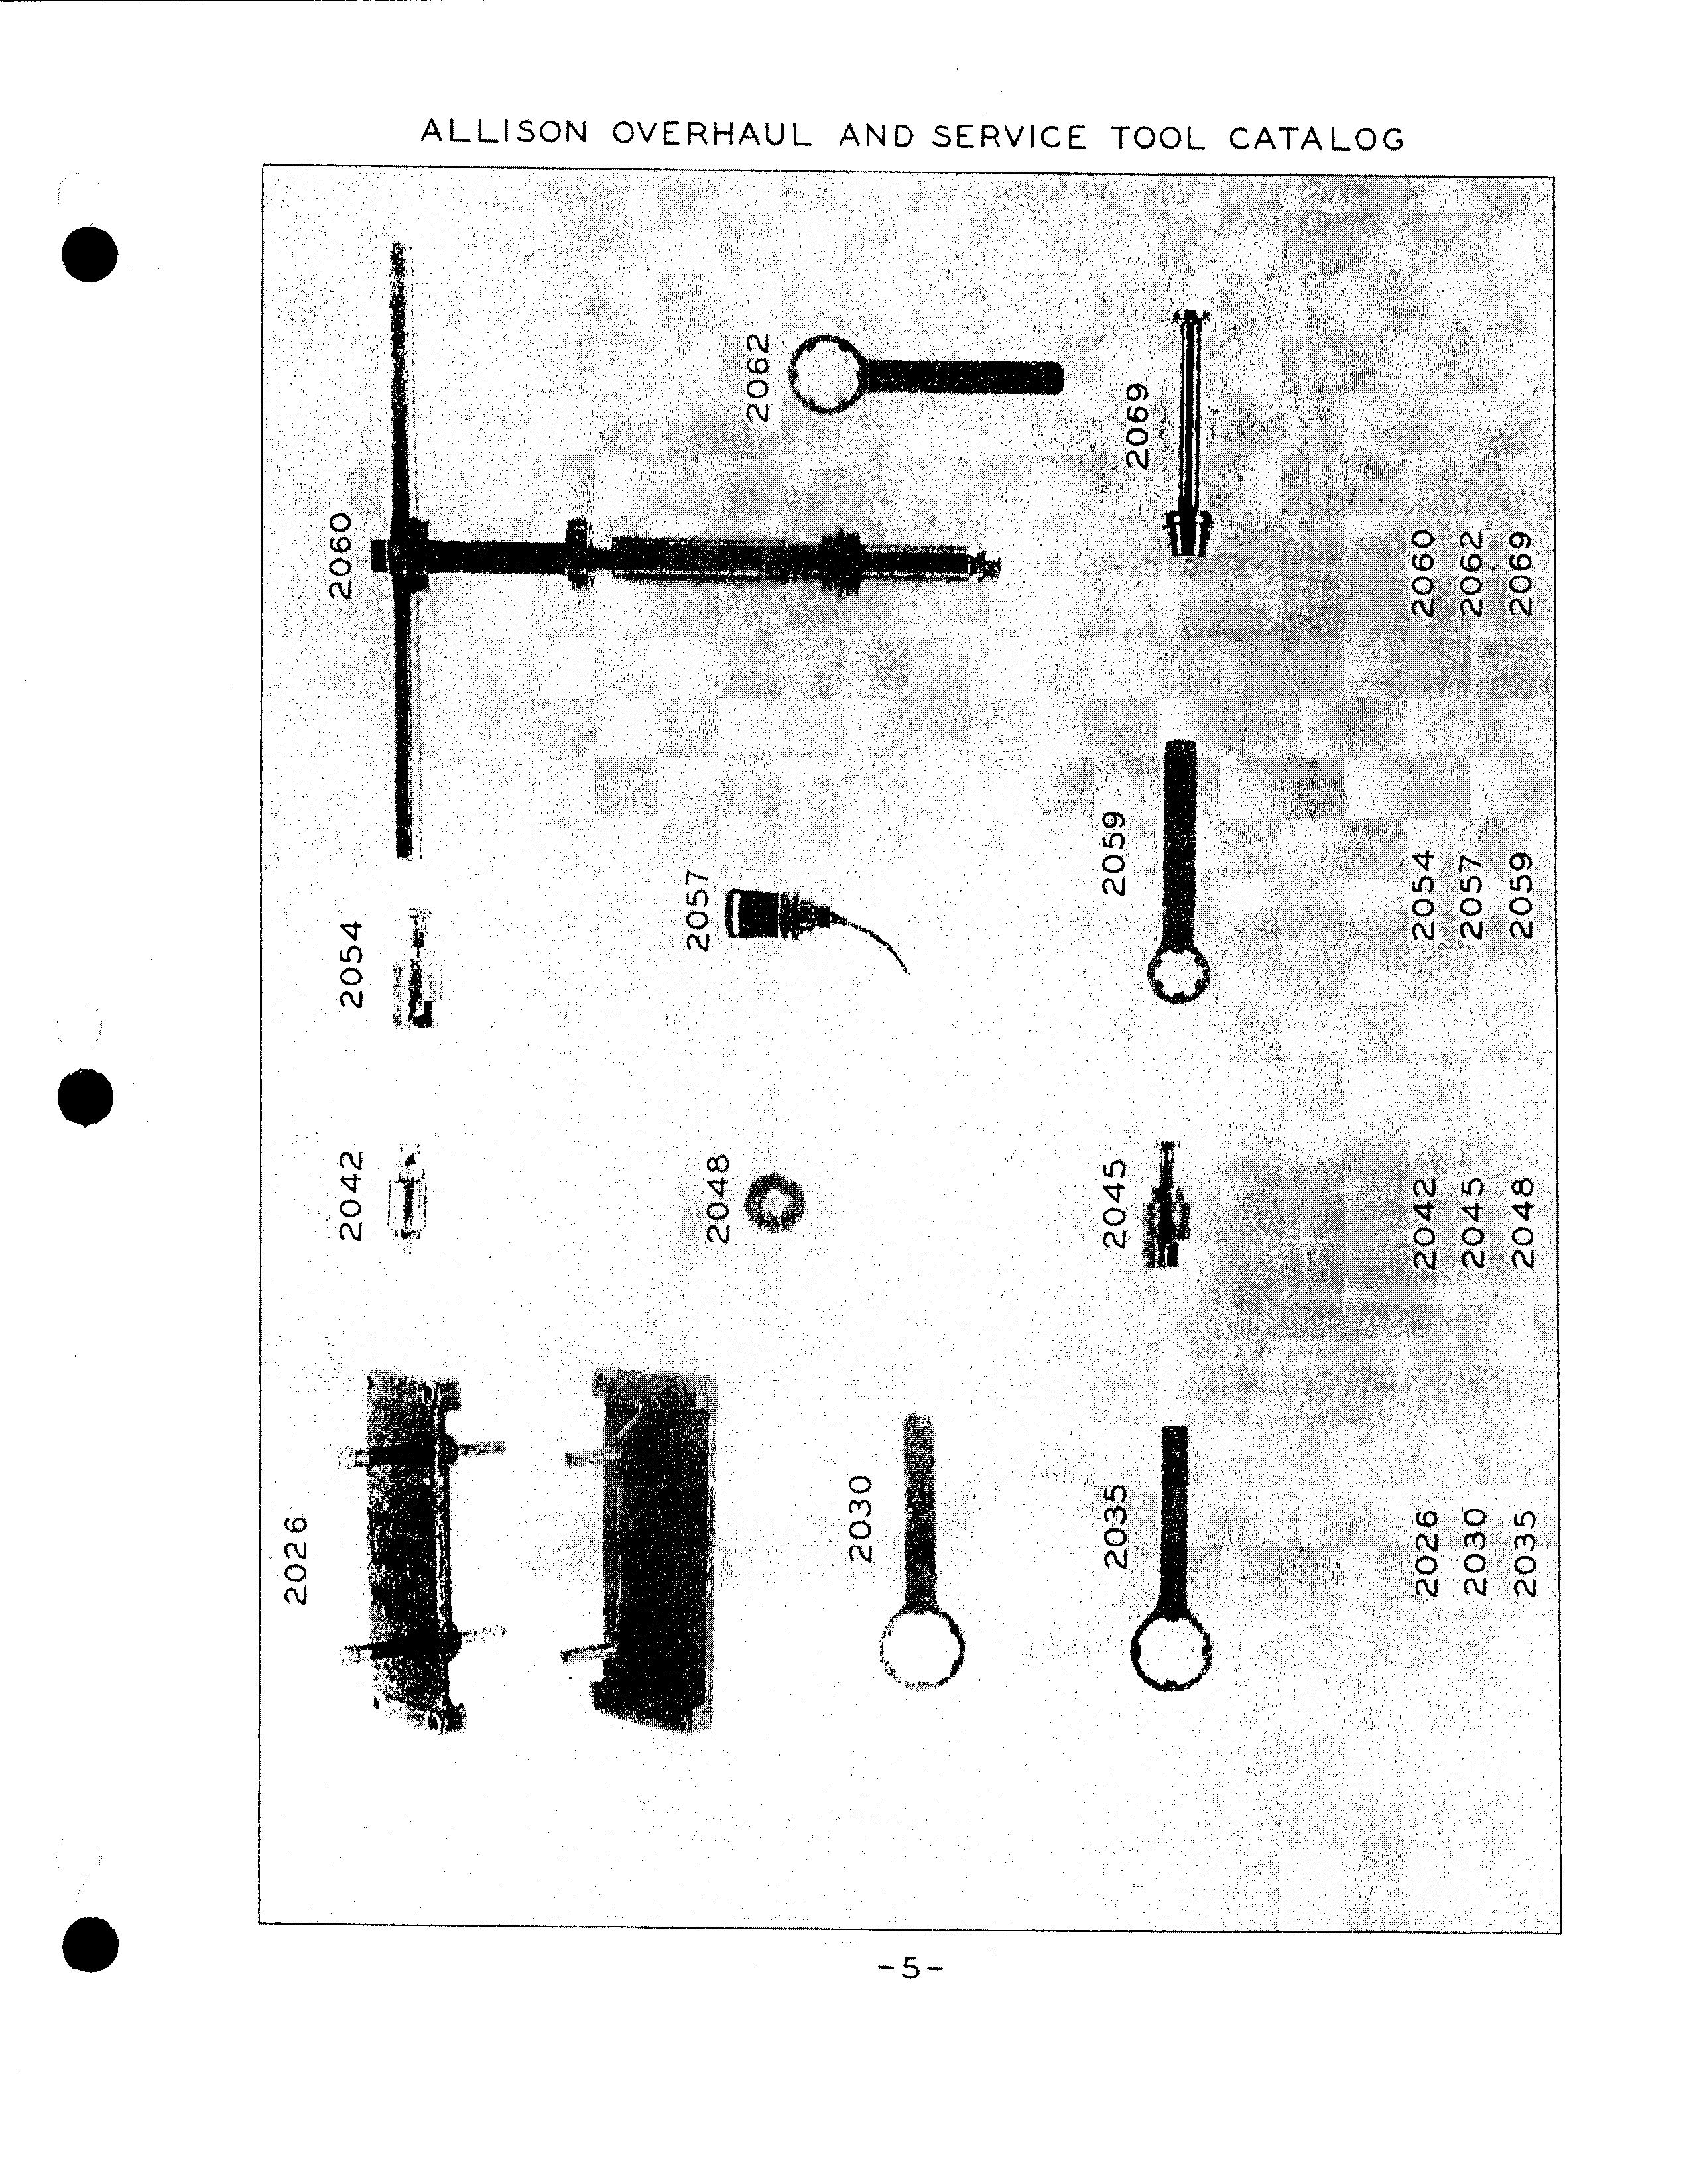 Sample page 7 from AirCorps Library document: Commercial Overhaul and Service Tool Catalog for Allison Engines